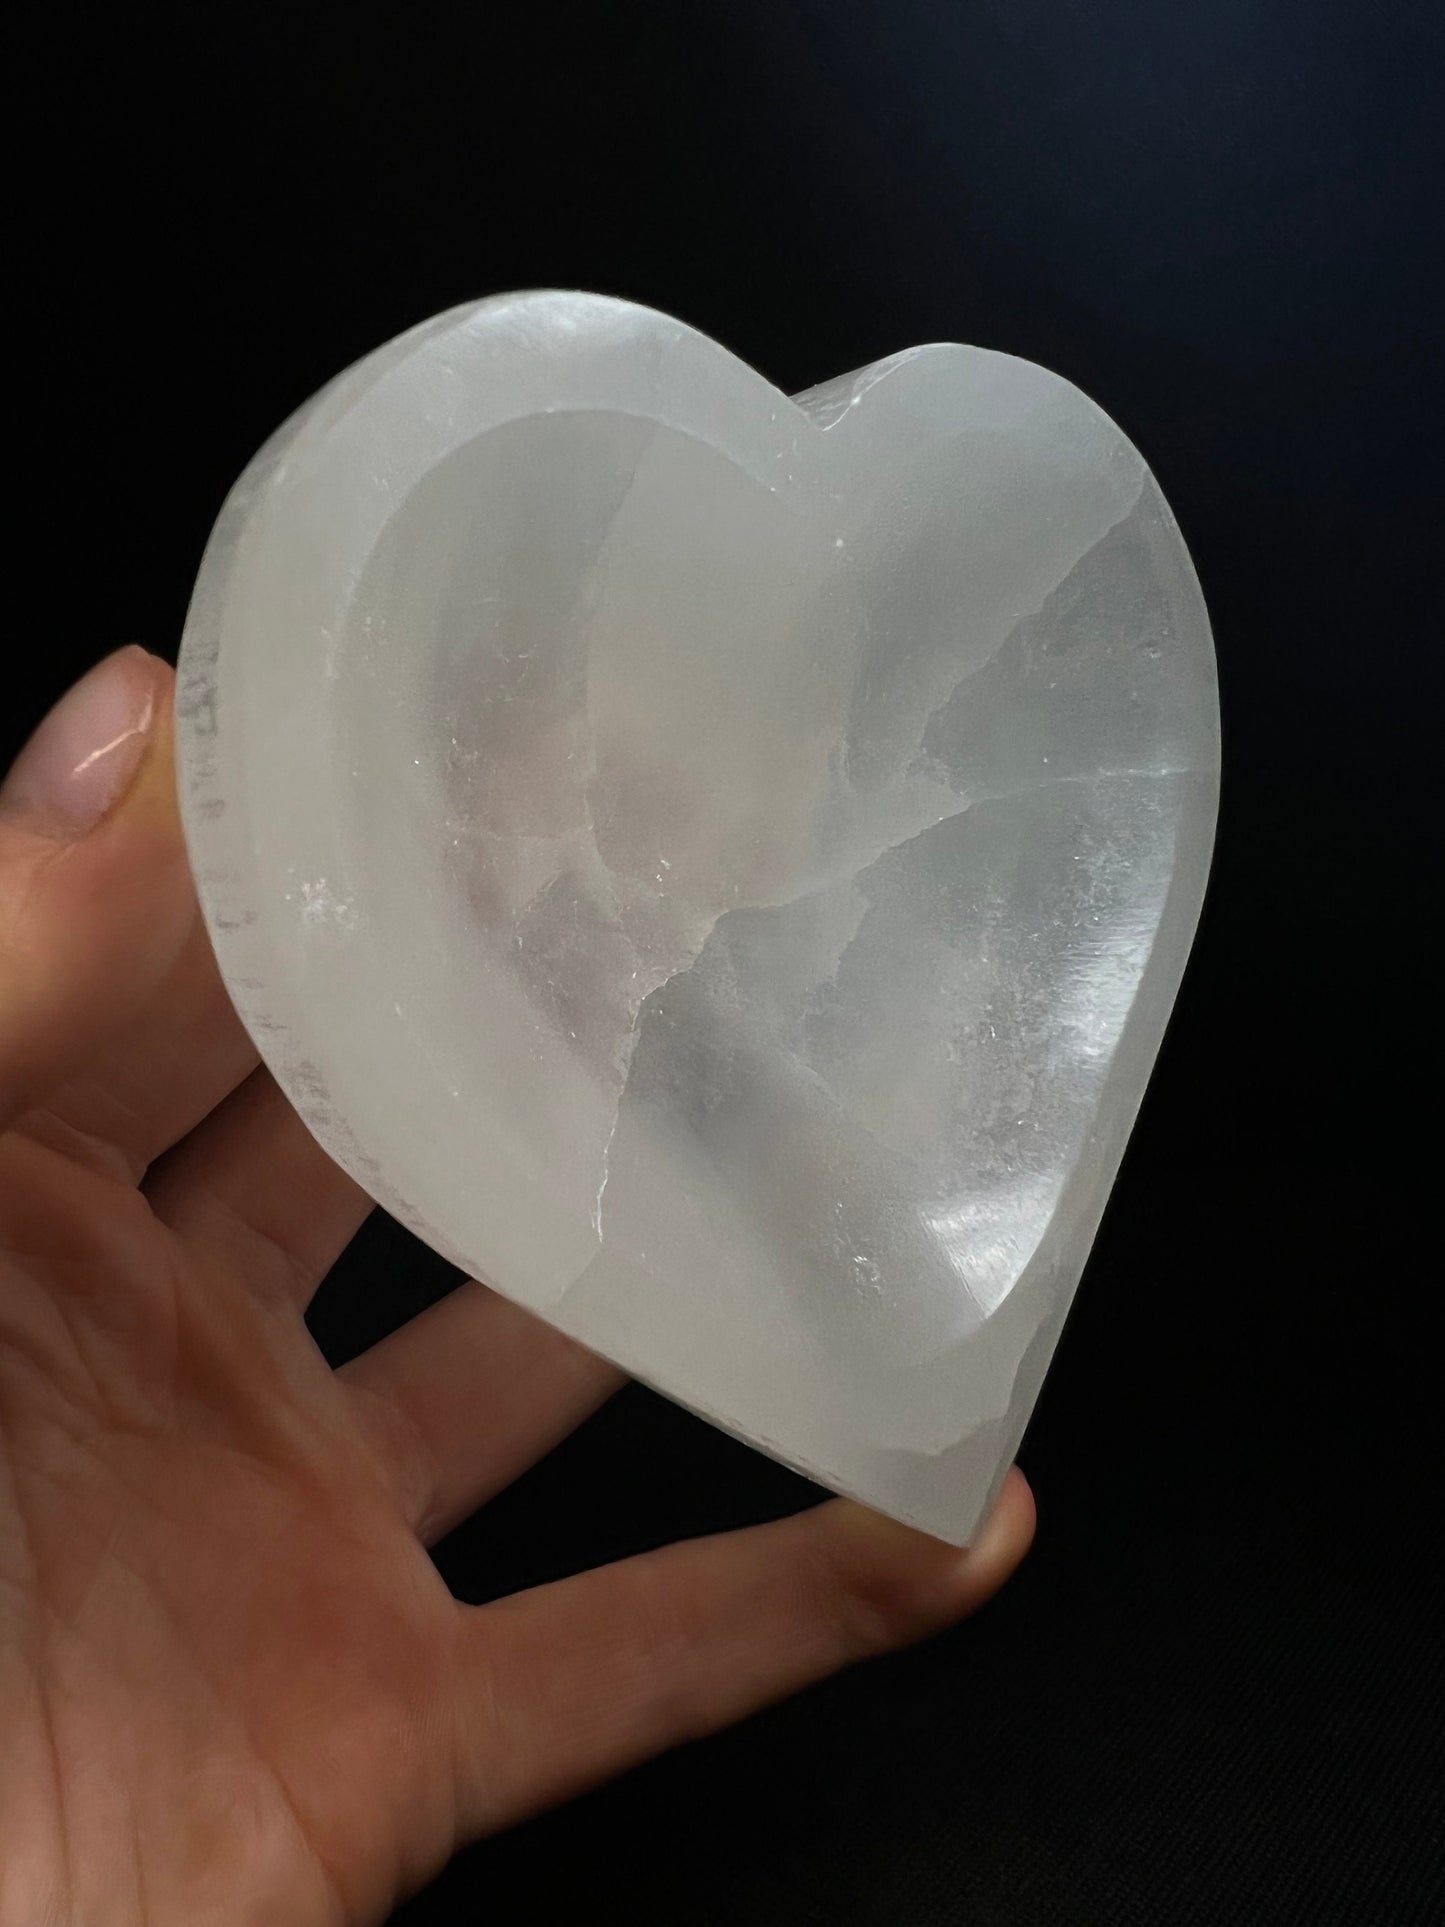 Gorgeous High Quality Selenite Heart Charging Bowl From Morocco, Home Decor, Gift